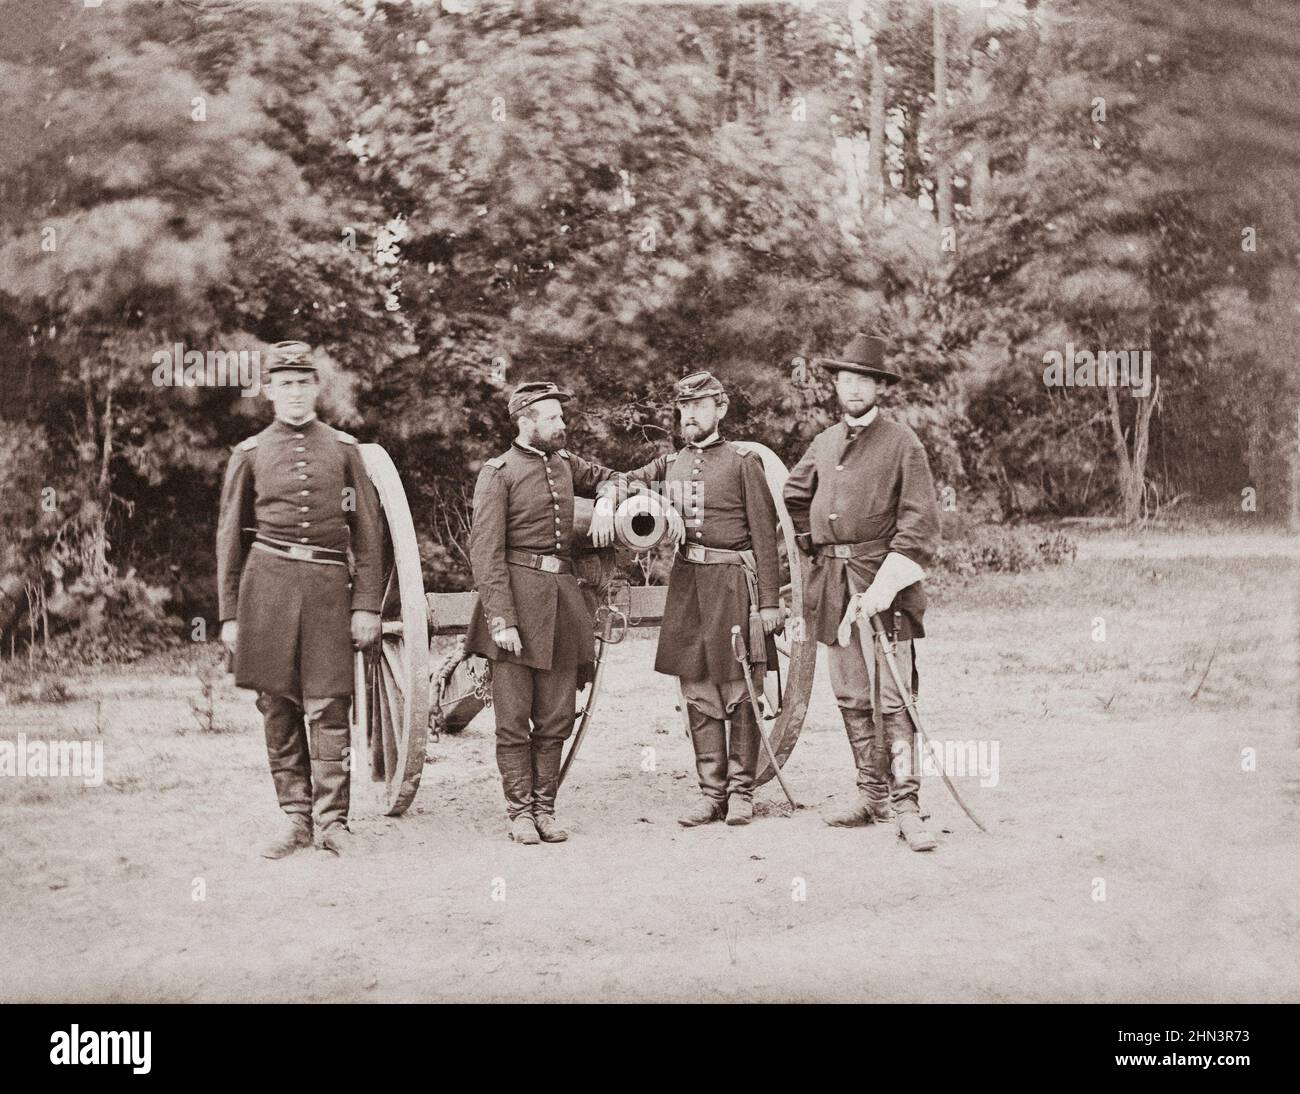 American Civil War. Fair Oaks, Virginia. Captain Horatio G. Gibson (second from left) and officers of his battery.  Photograph from the main eastern t Stock Photo